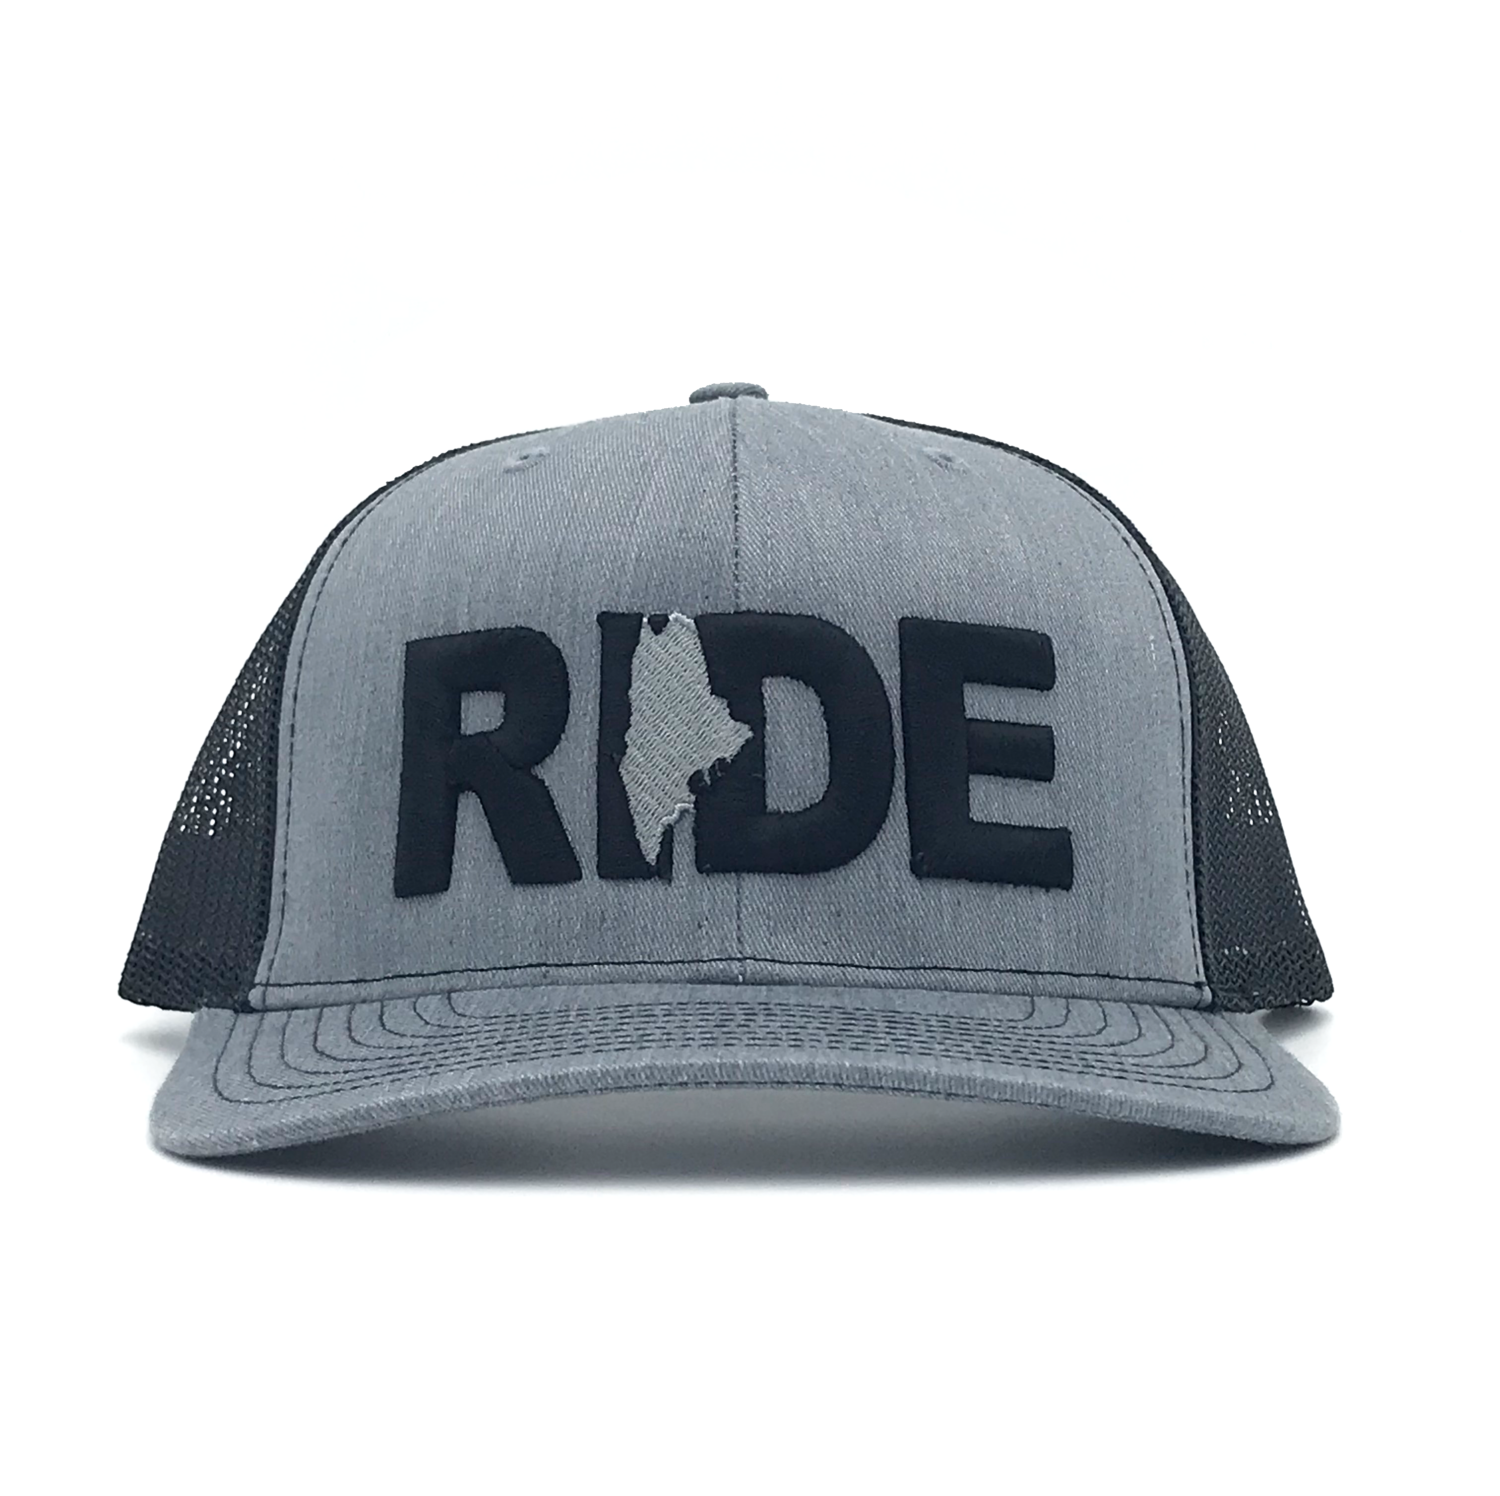 Ride Maine Classic Pro 3D Puff Embroidered Snapback Trucker Hat Heather Gray/Black